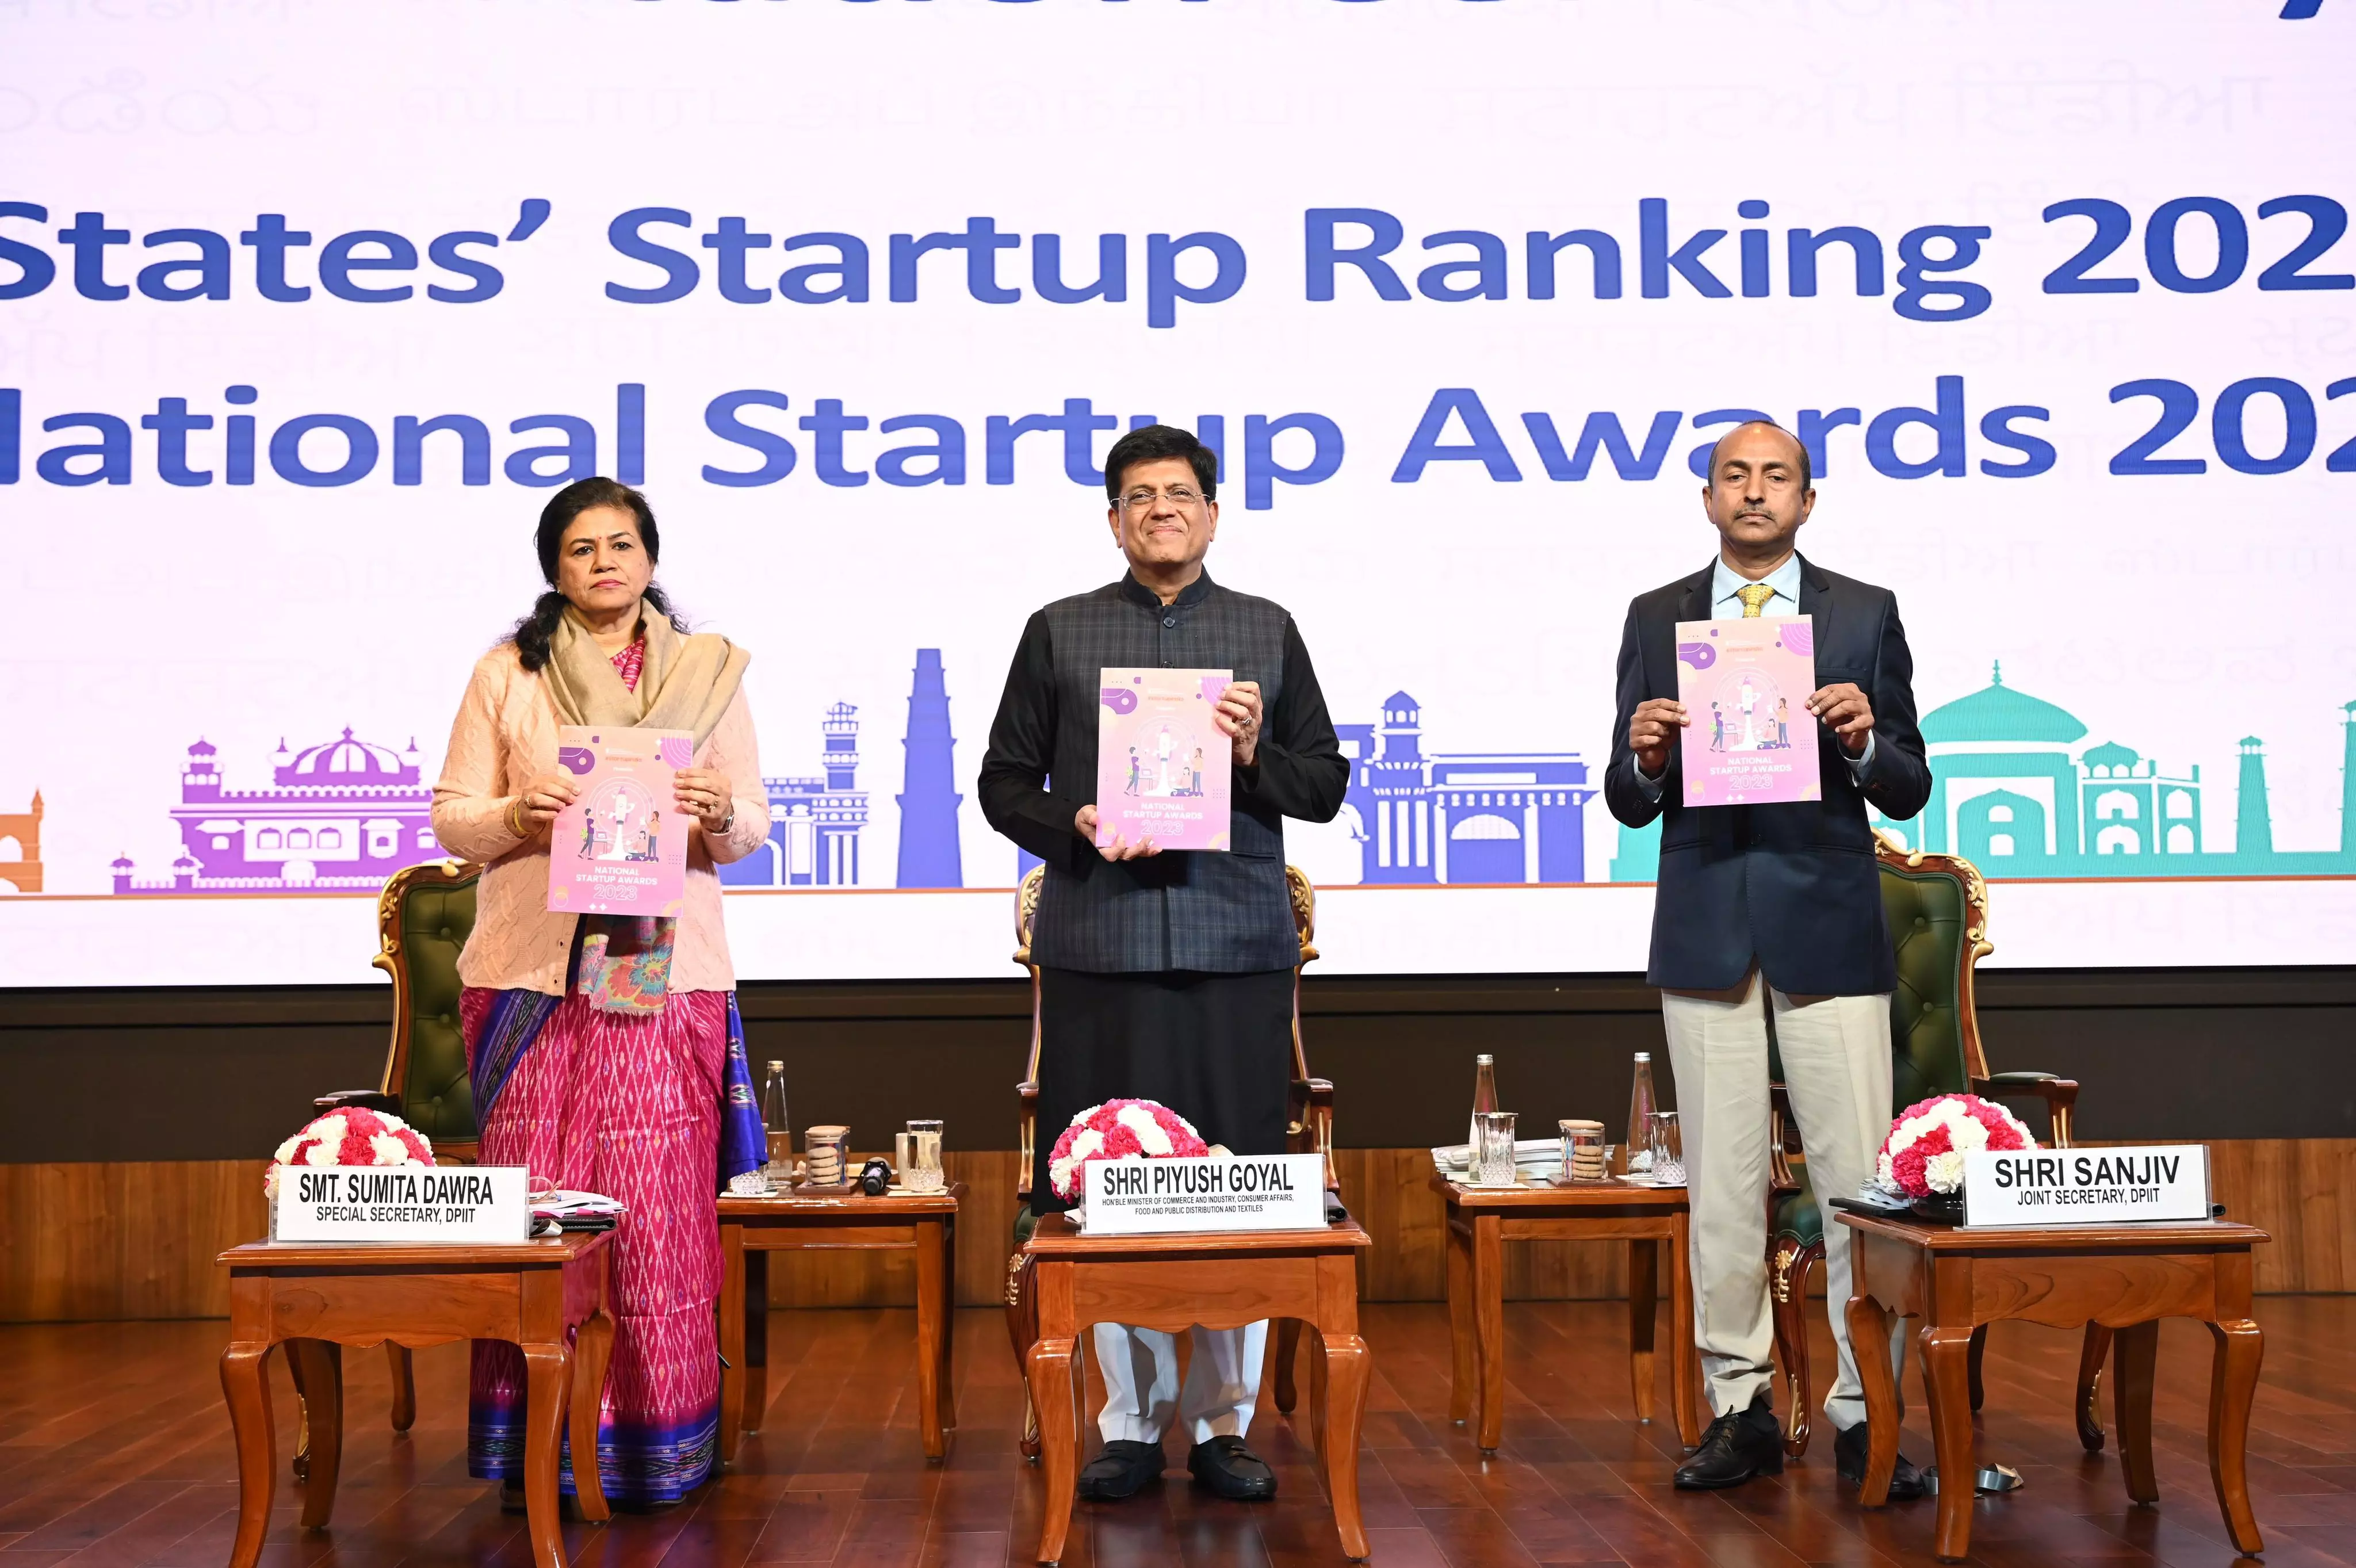 Gujarat and Karnataka Lead as Best Performers in DPIITs State Startup Ecosystem Ranking